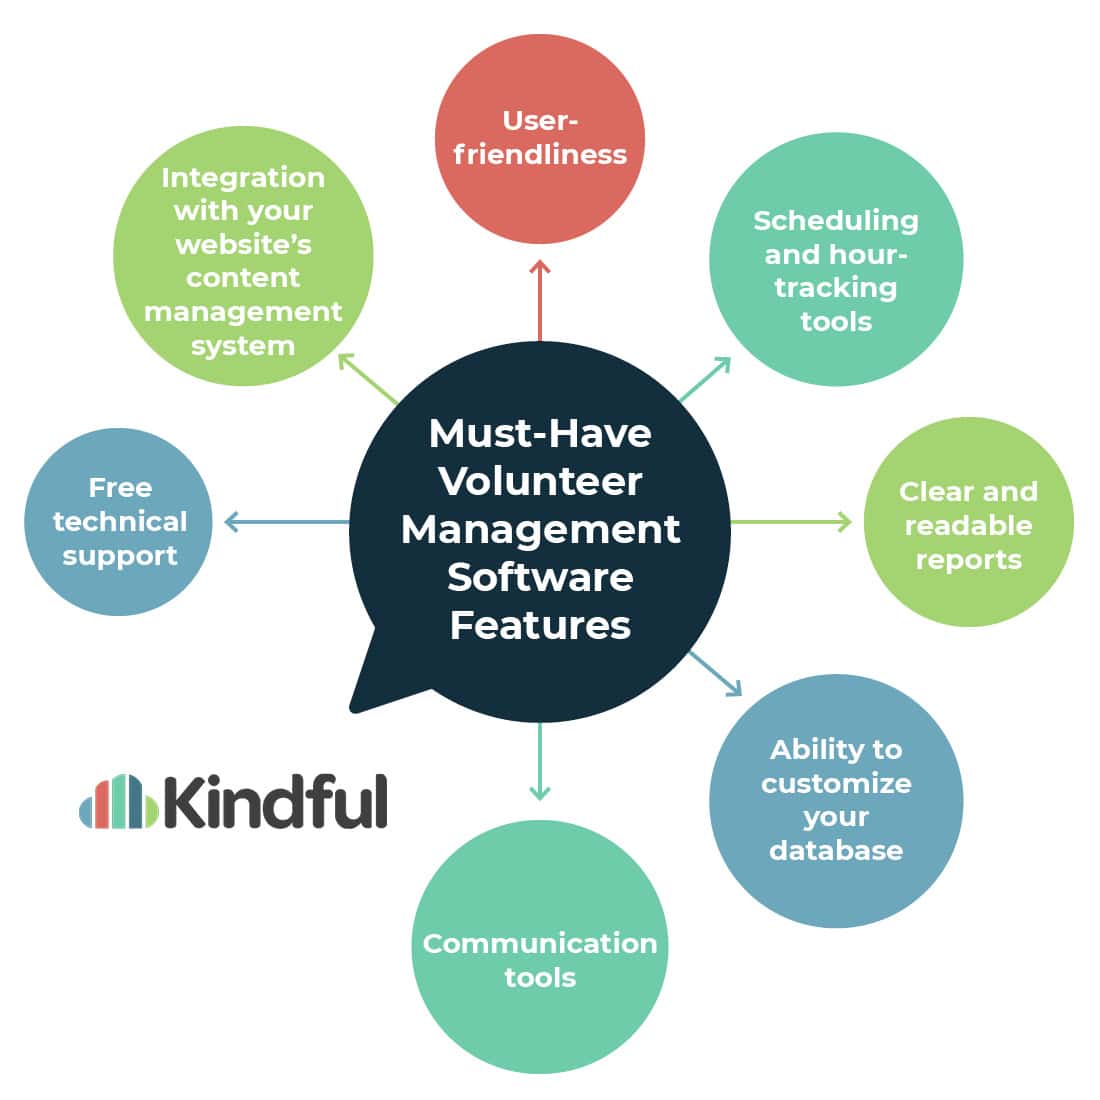 This image shows must-have volunteer management software features, which are described in the bulleted list below. 